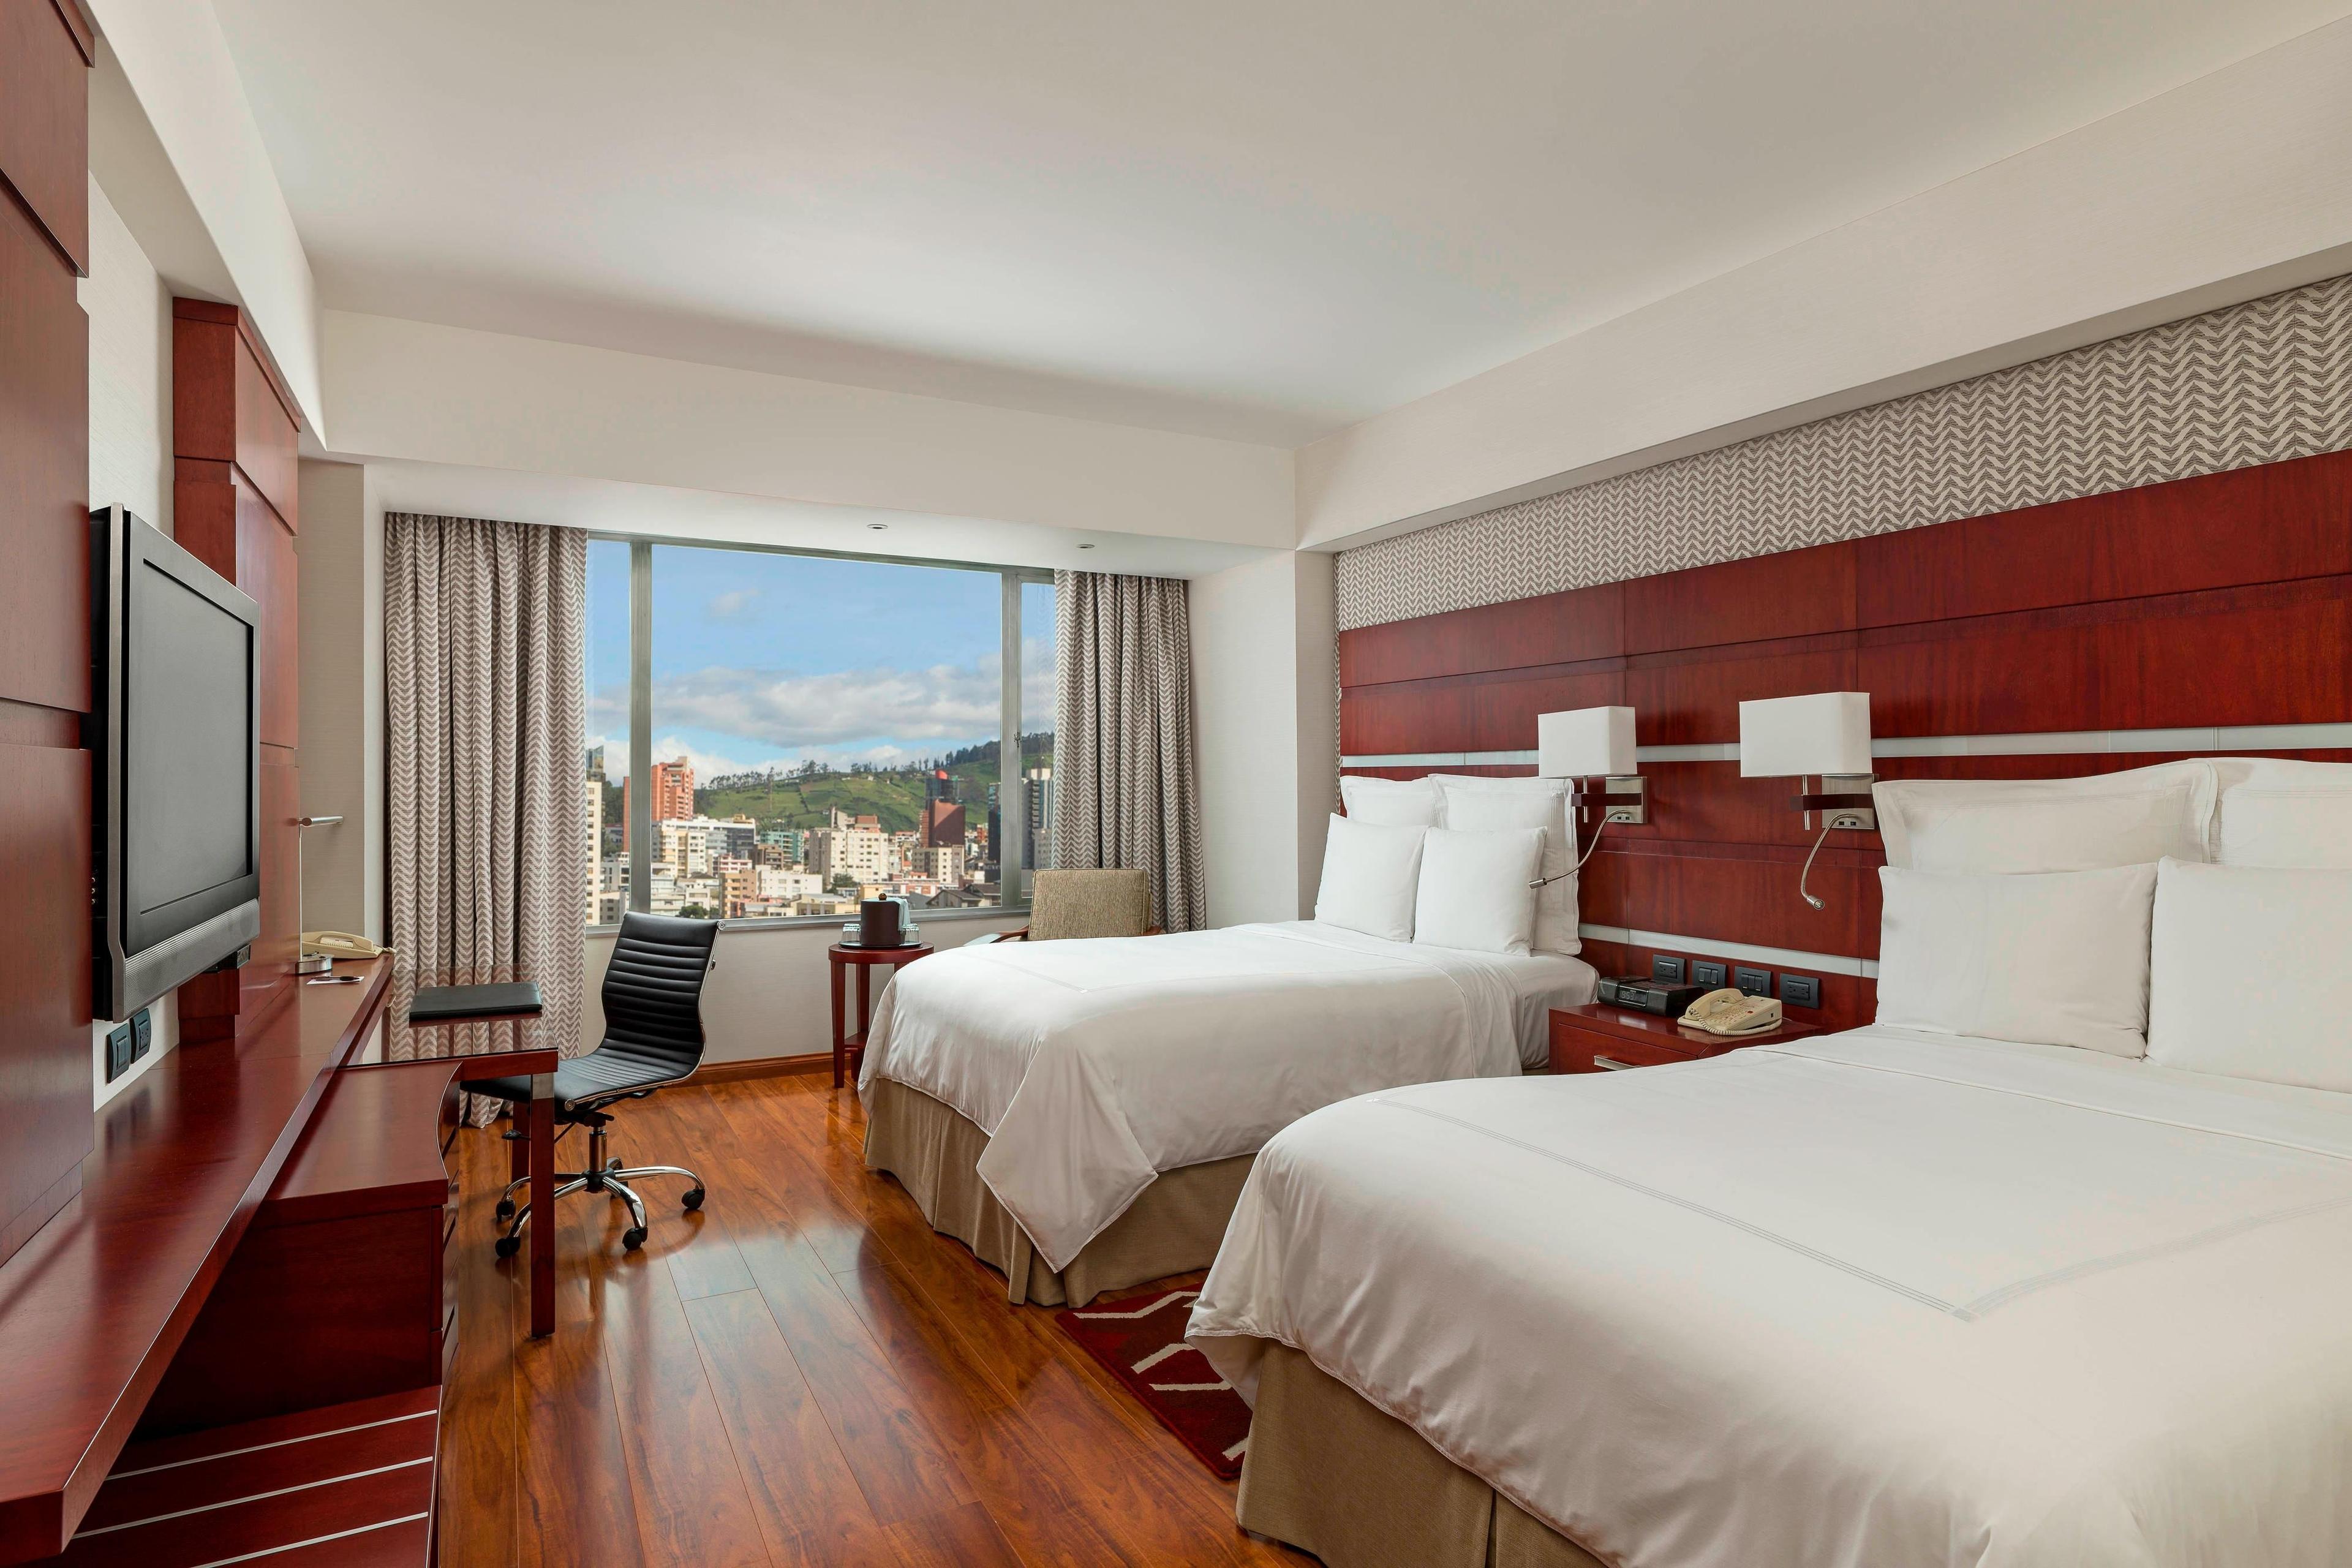 Relax in our luxury rooms, equipped with 42-inch flat-screen TVs, plush bedding and 24-hour room service. We offer modern design for your travels in Quito.